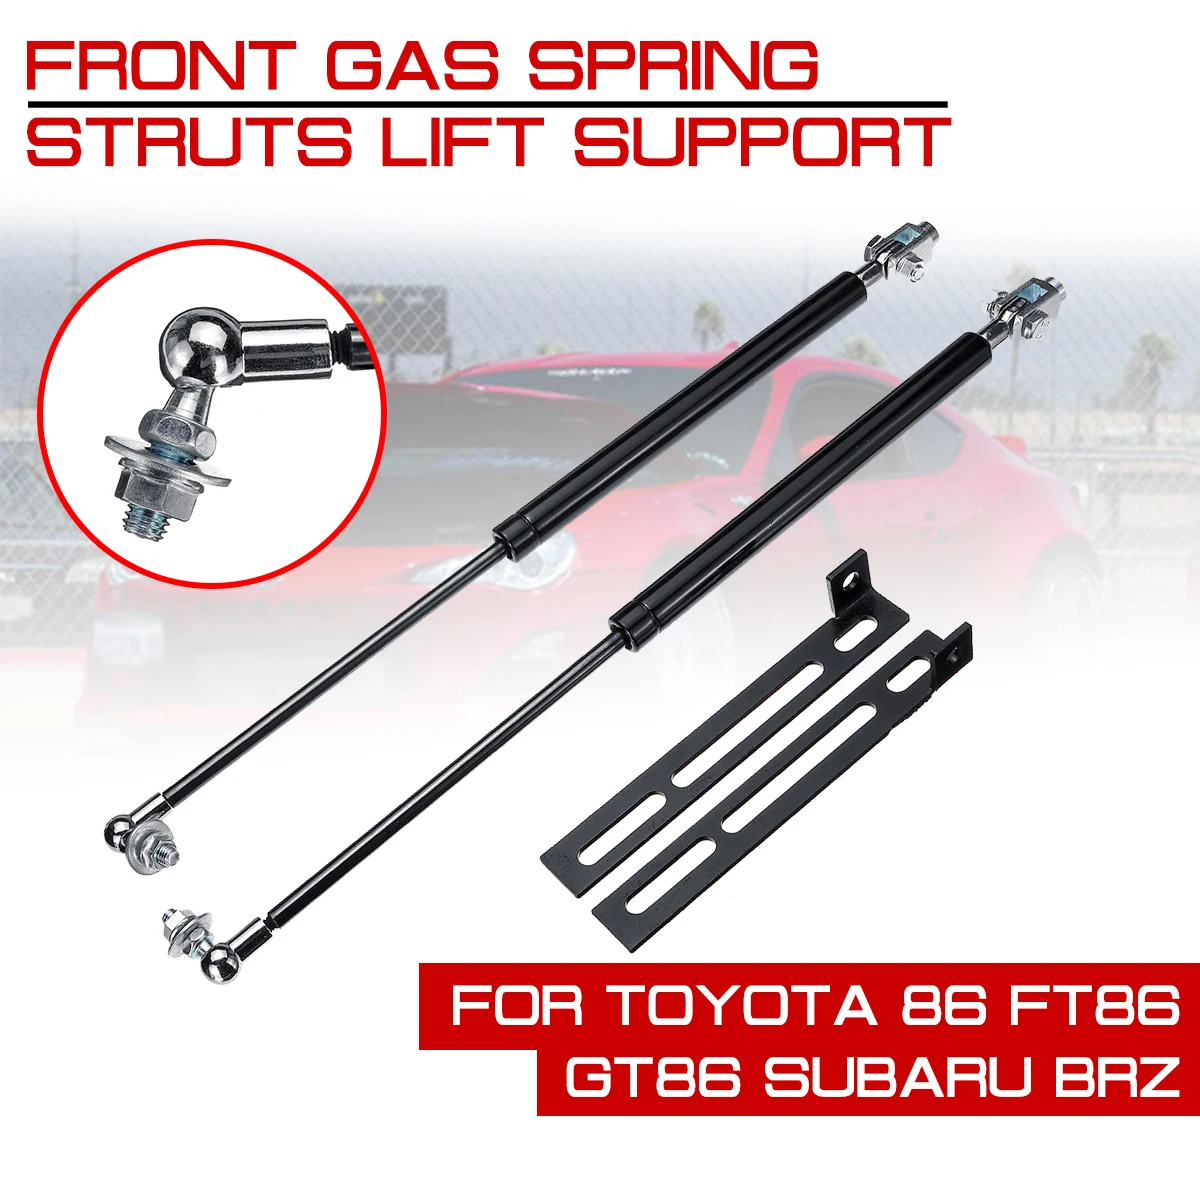 

For Toyota 86 FT86 GT86 Subaru BRZ Scion FR-S Front Engine Cover Hood Shock Lift Struts Bar Support Arm Rod Hydraulic Gas Spring